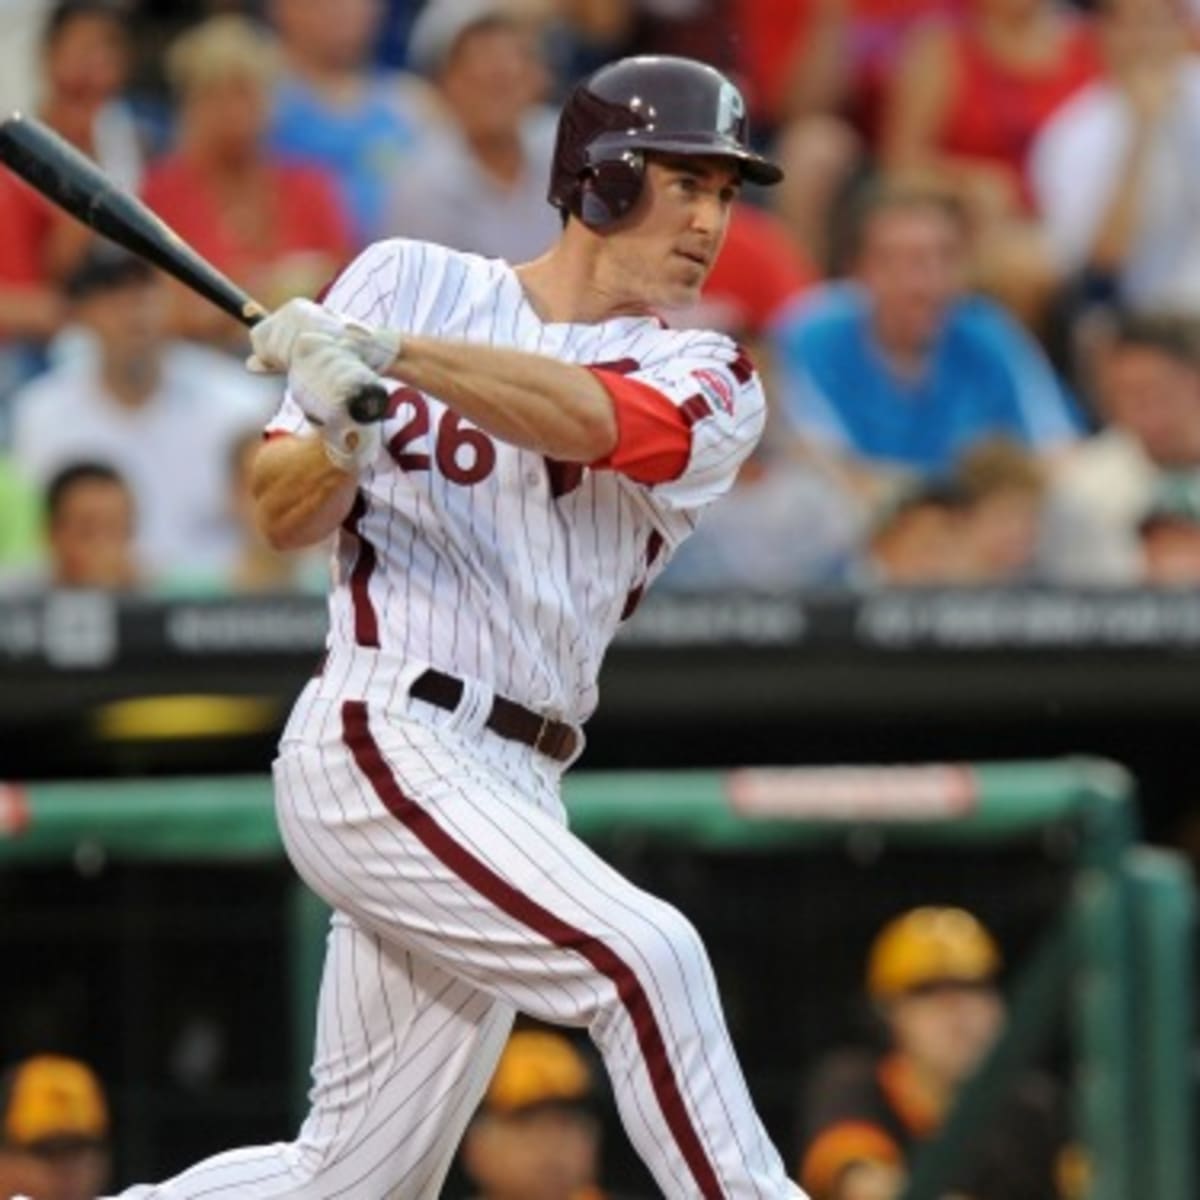 Phillies place second baseman Chase Utley on DL - Sports Illustrated